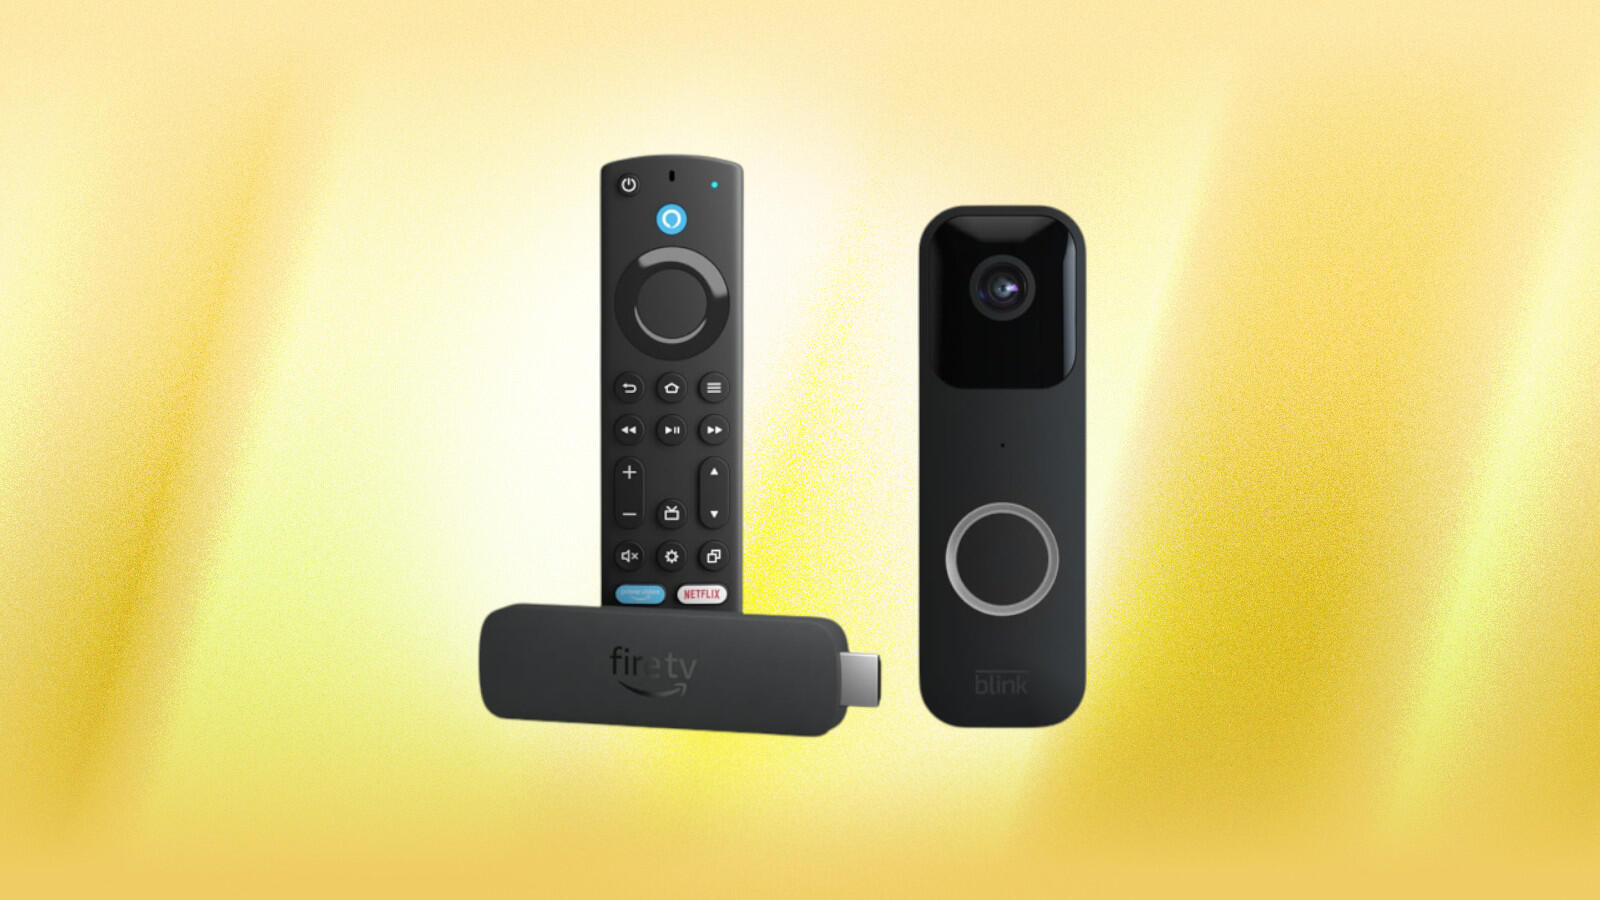 Get the New Fire TV 4K Max and a Blink Video Doorbell for Just $65